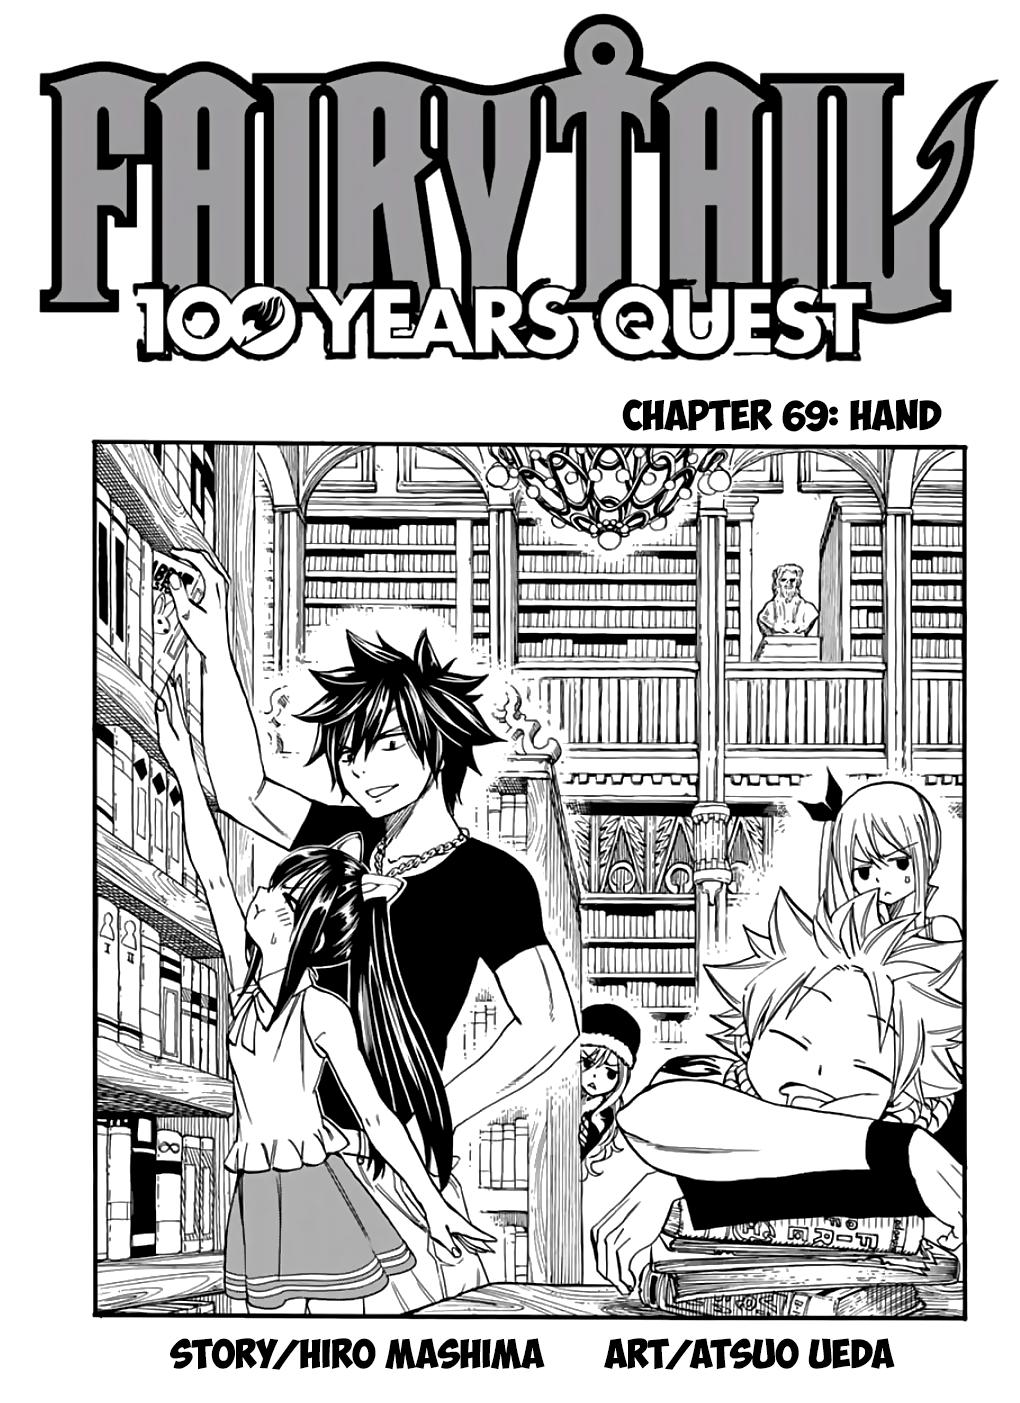 Read Fairy Tail 100 Years Quest Chapter 69 Hand On Mangakakalot